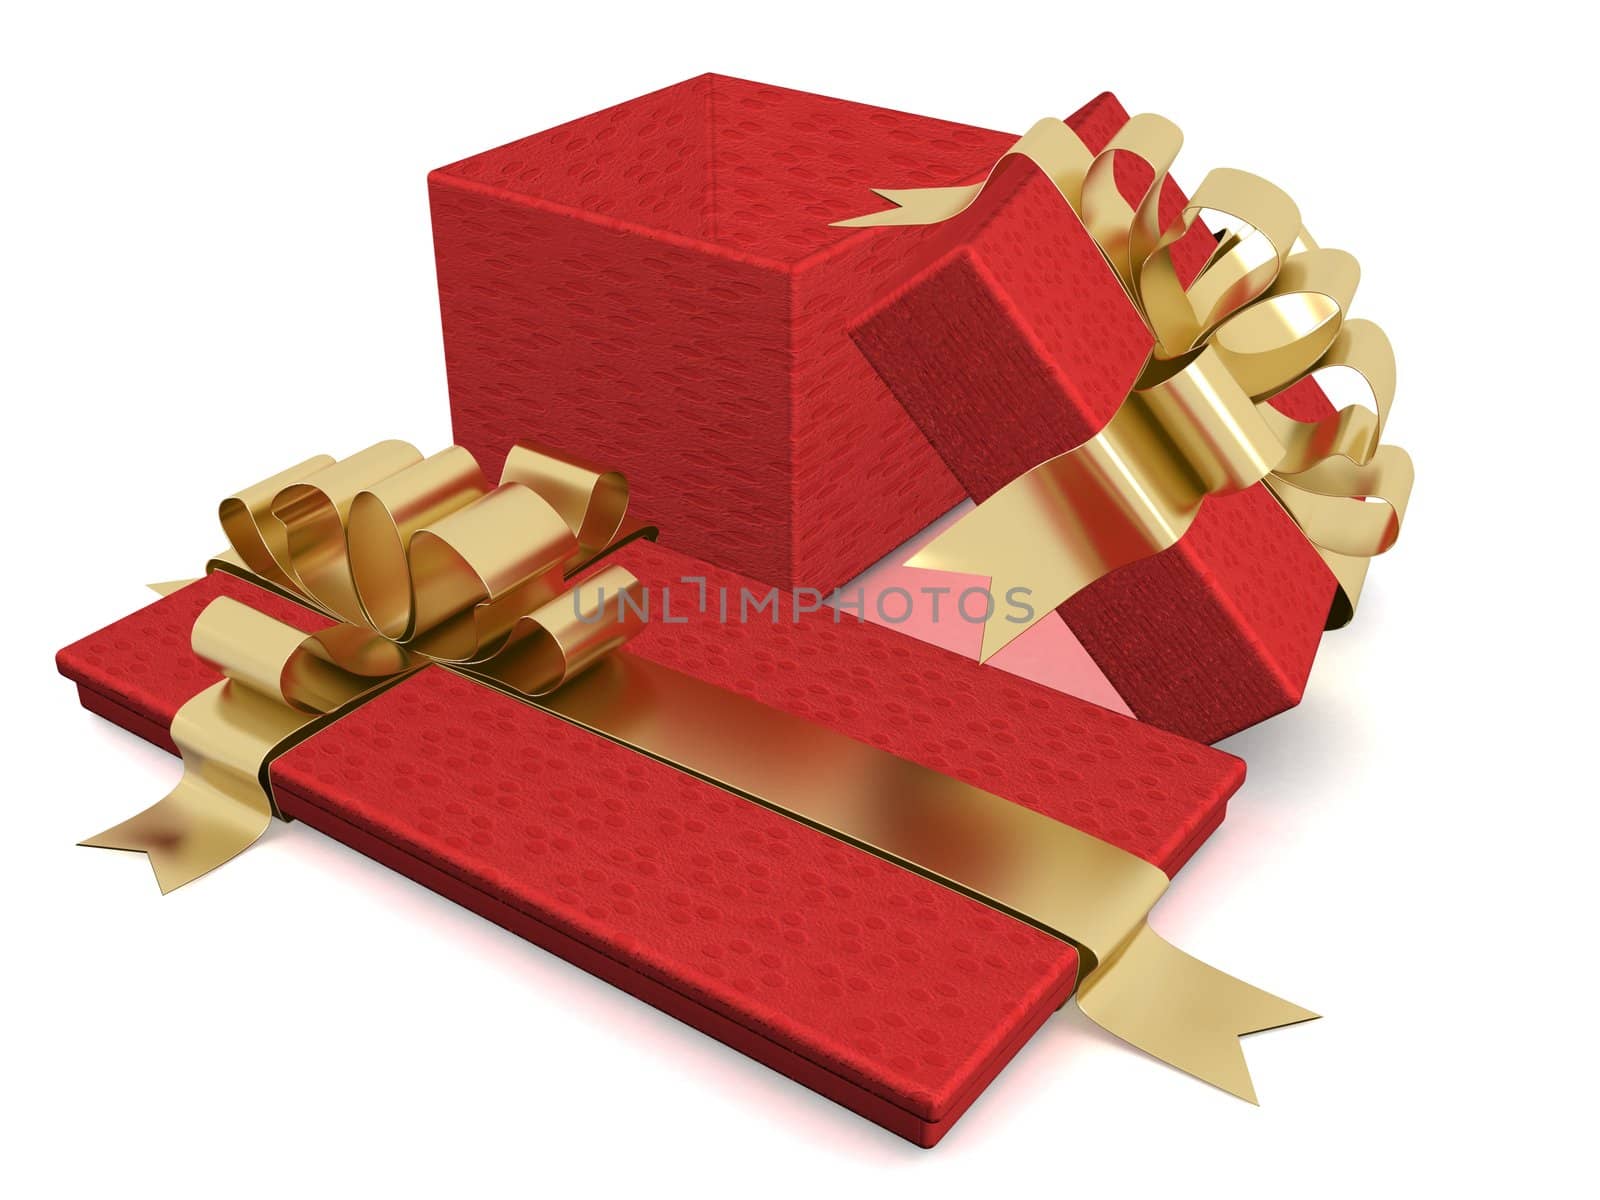 Two gift box. 3D image.